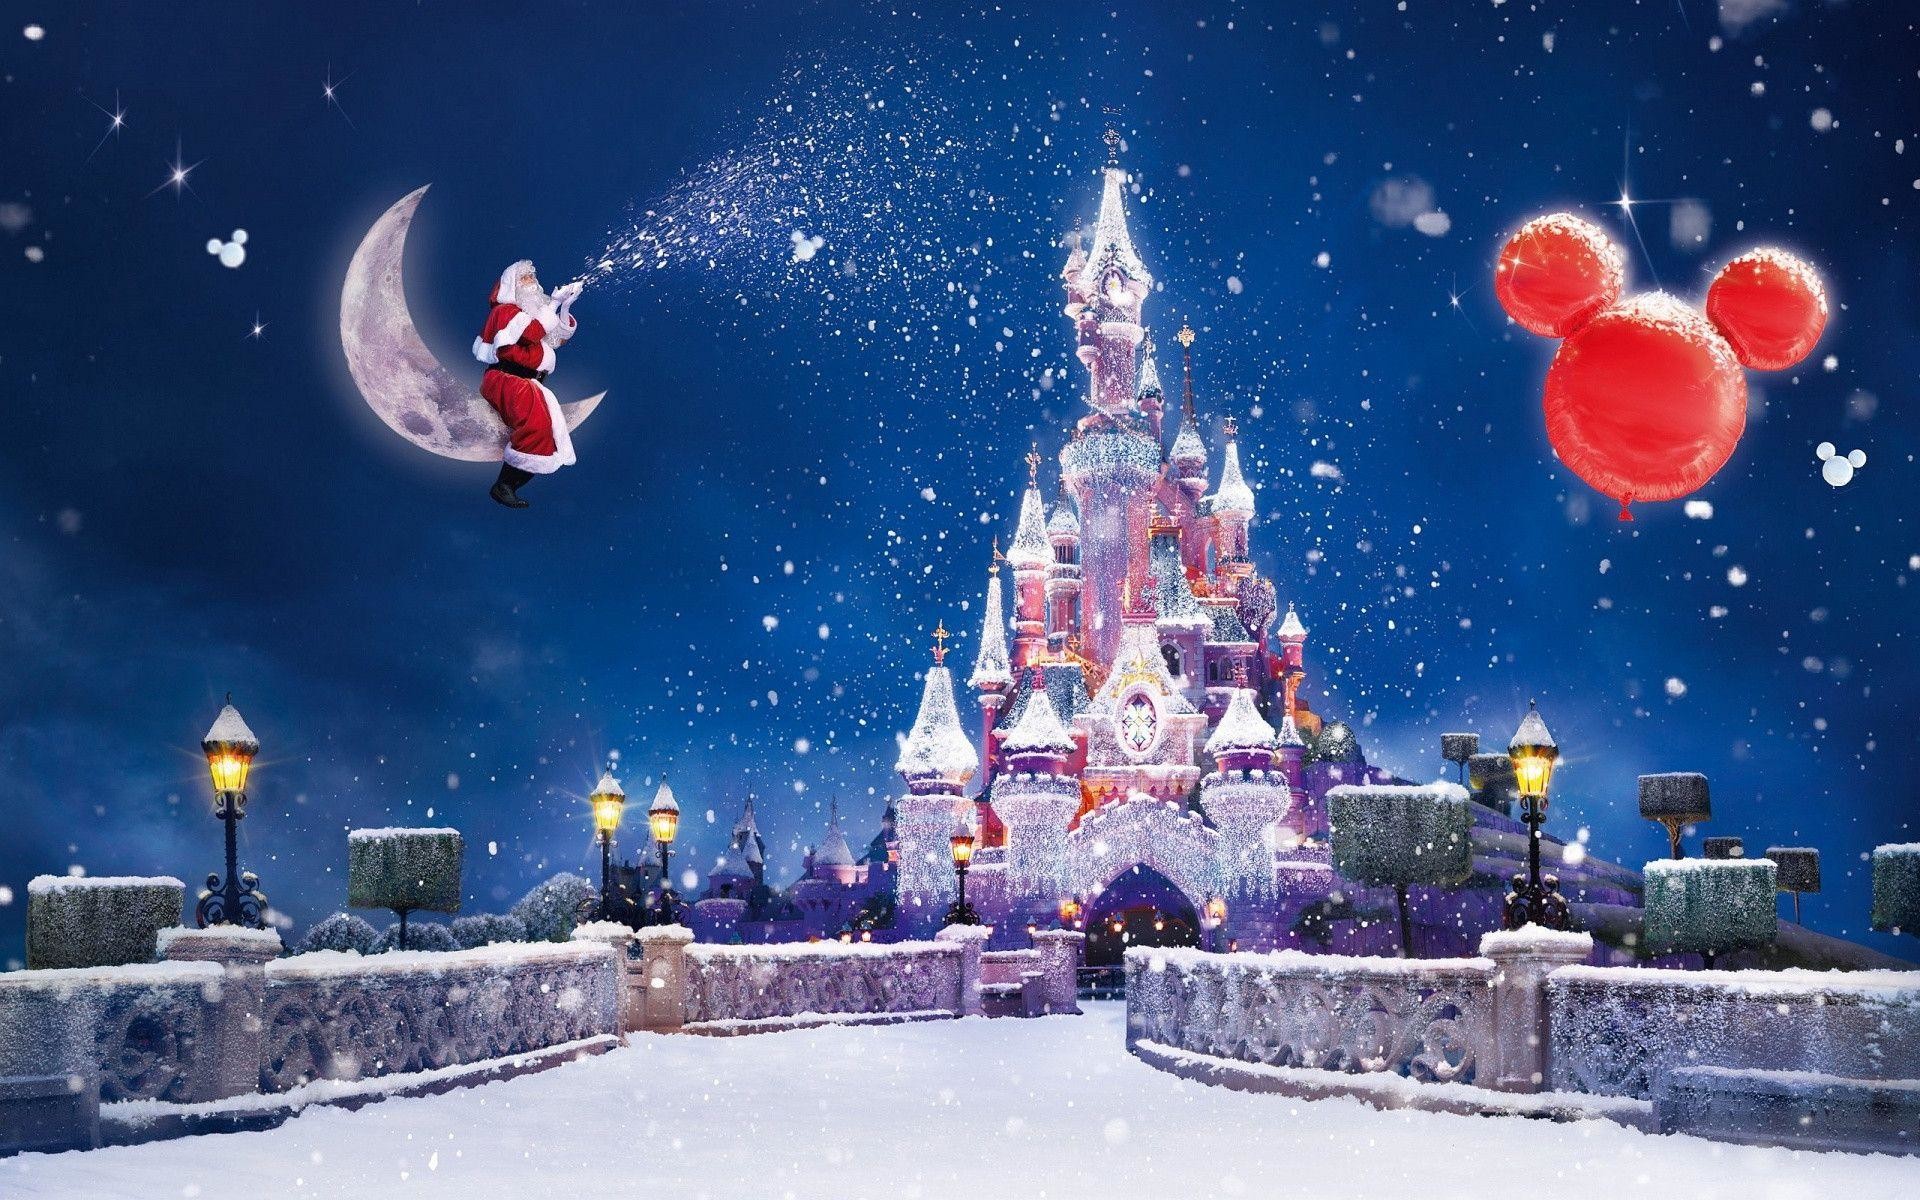 1920x1200 Disney Christmas Wallpapers - Full HD wallpaper search - page 2